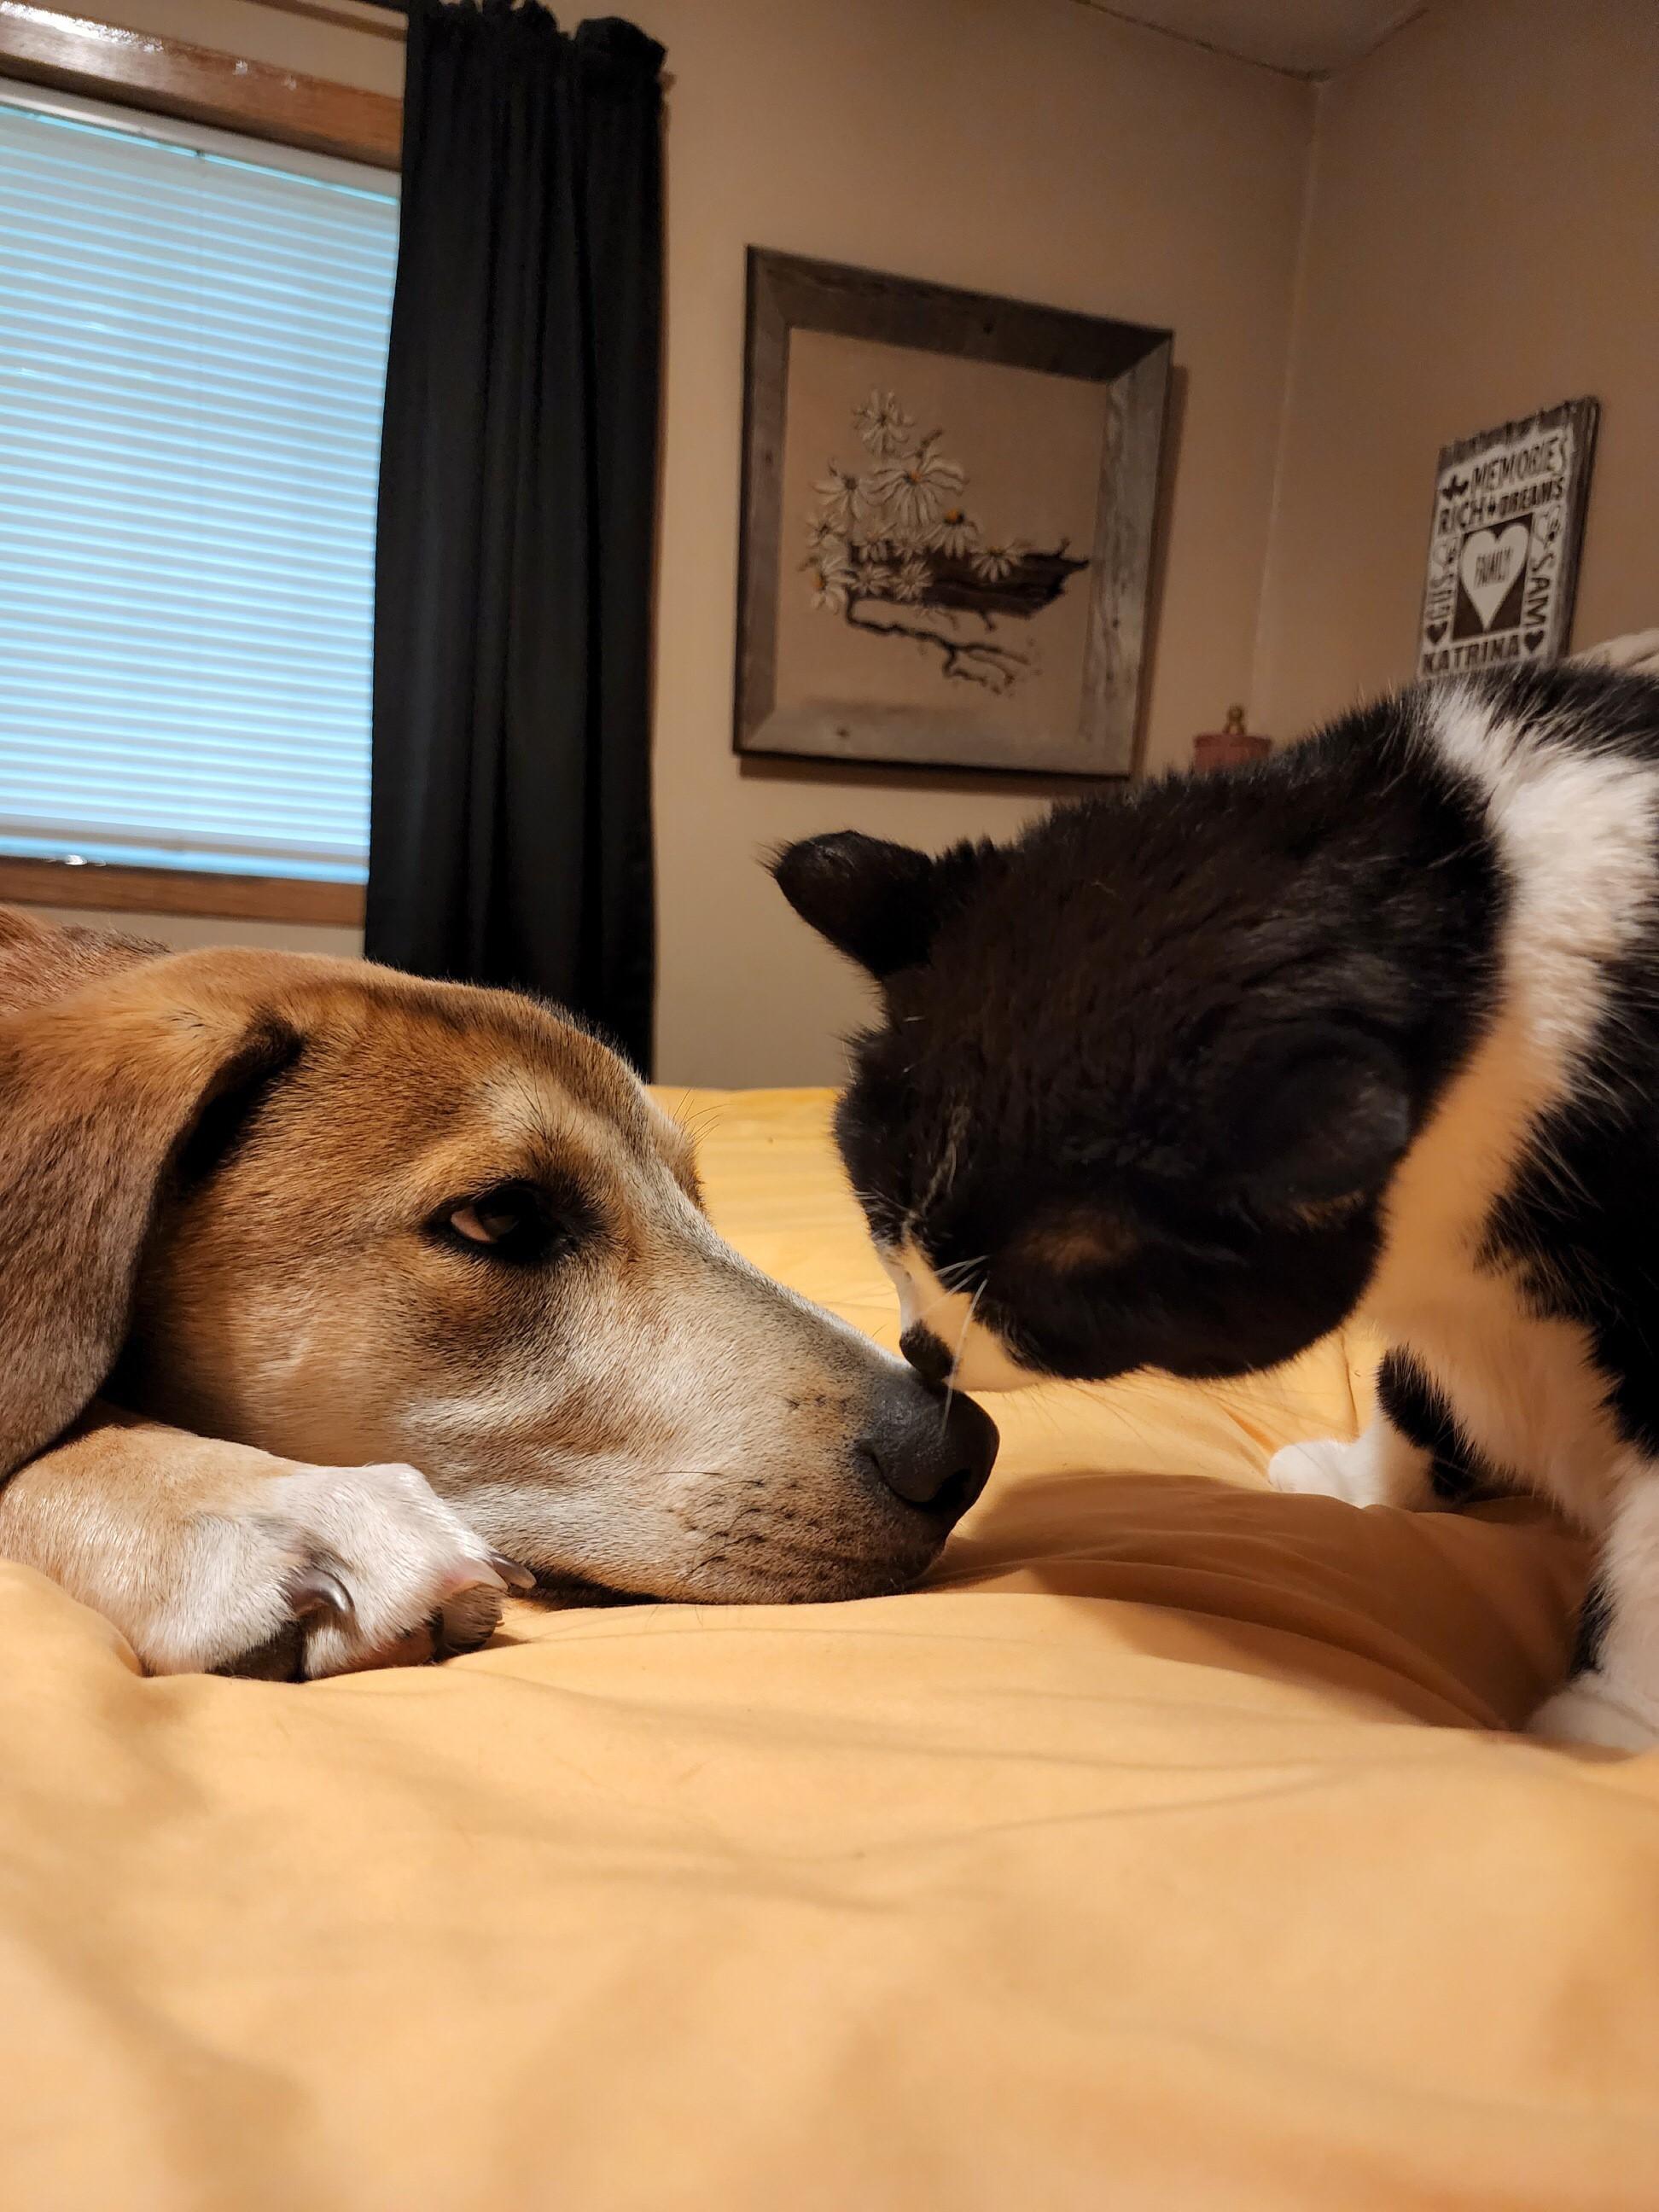 A brown dog and black and white cat touch noses